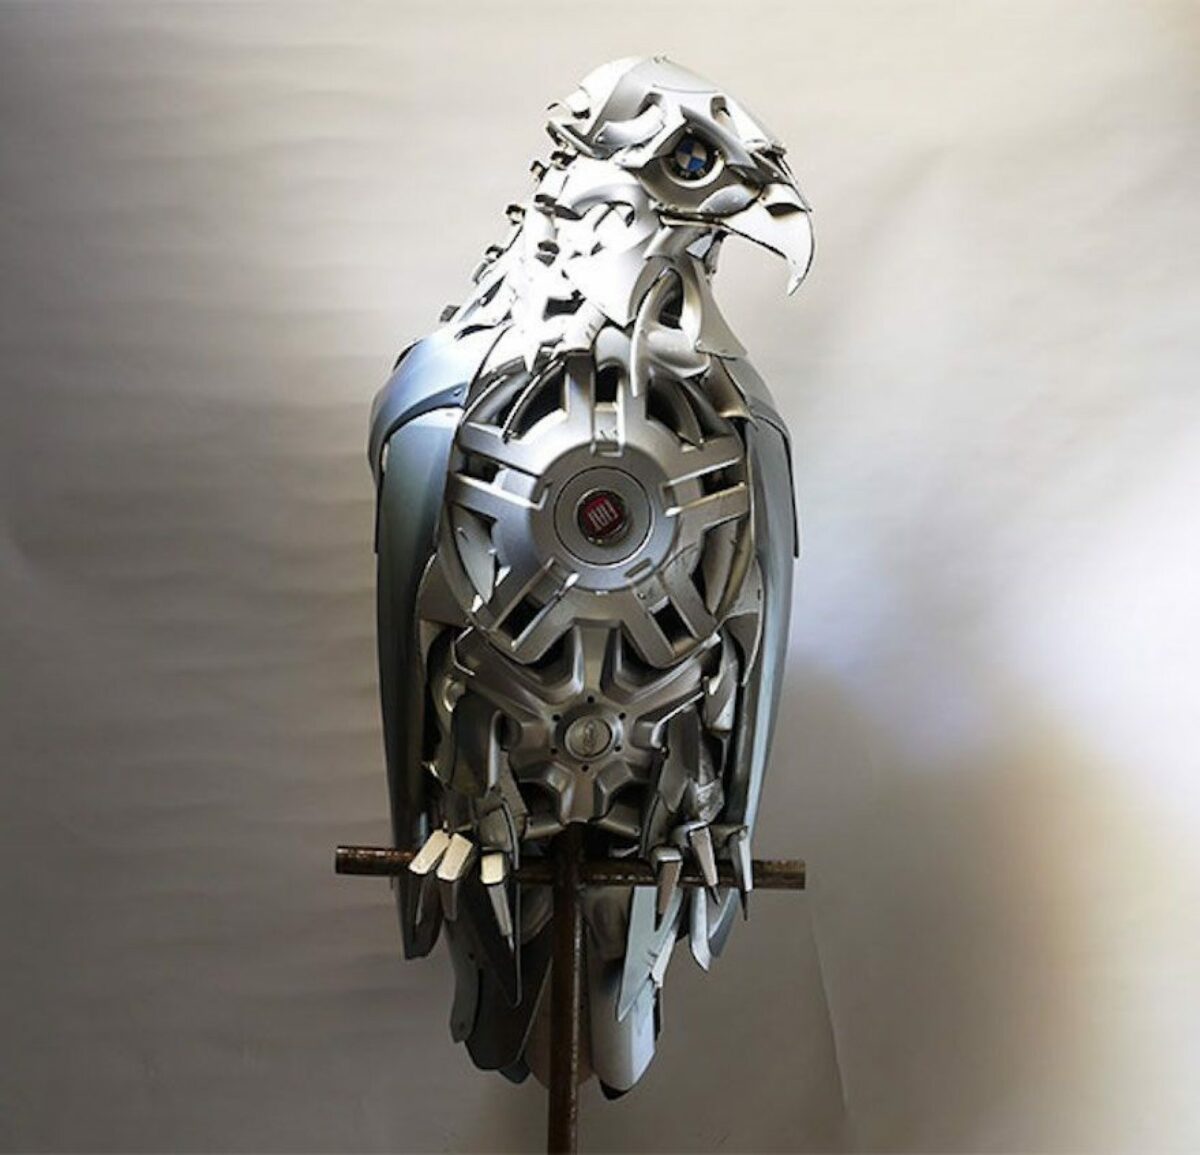 Old Hubcaps Transformed Into Incredible Animal Sculptures By Ptolemy Elrington 26